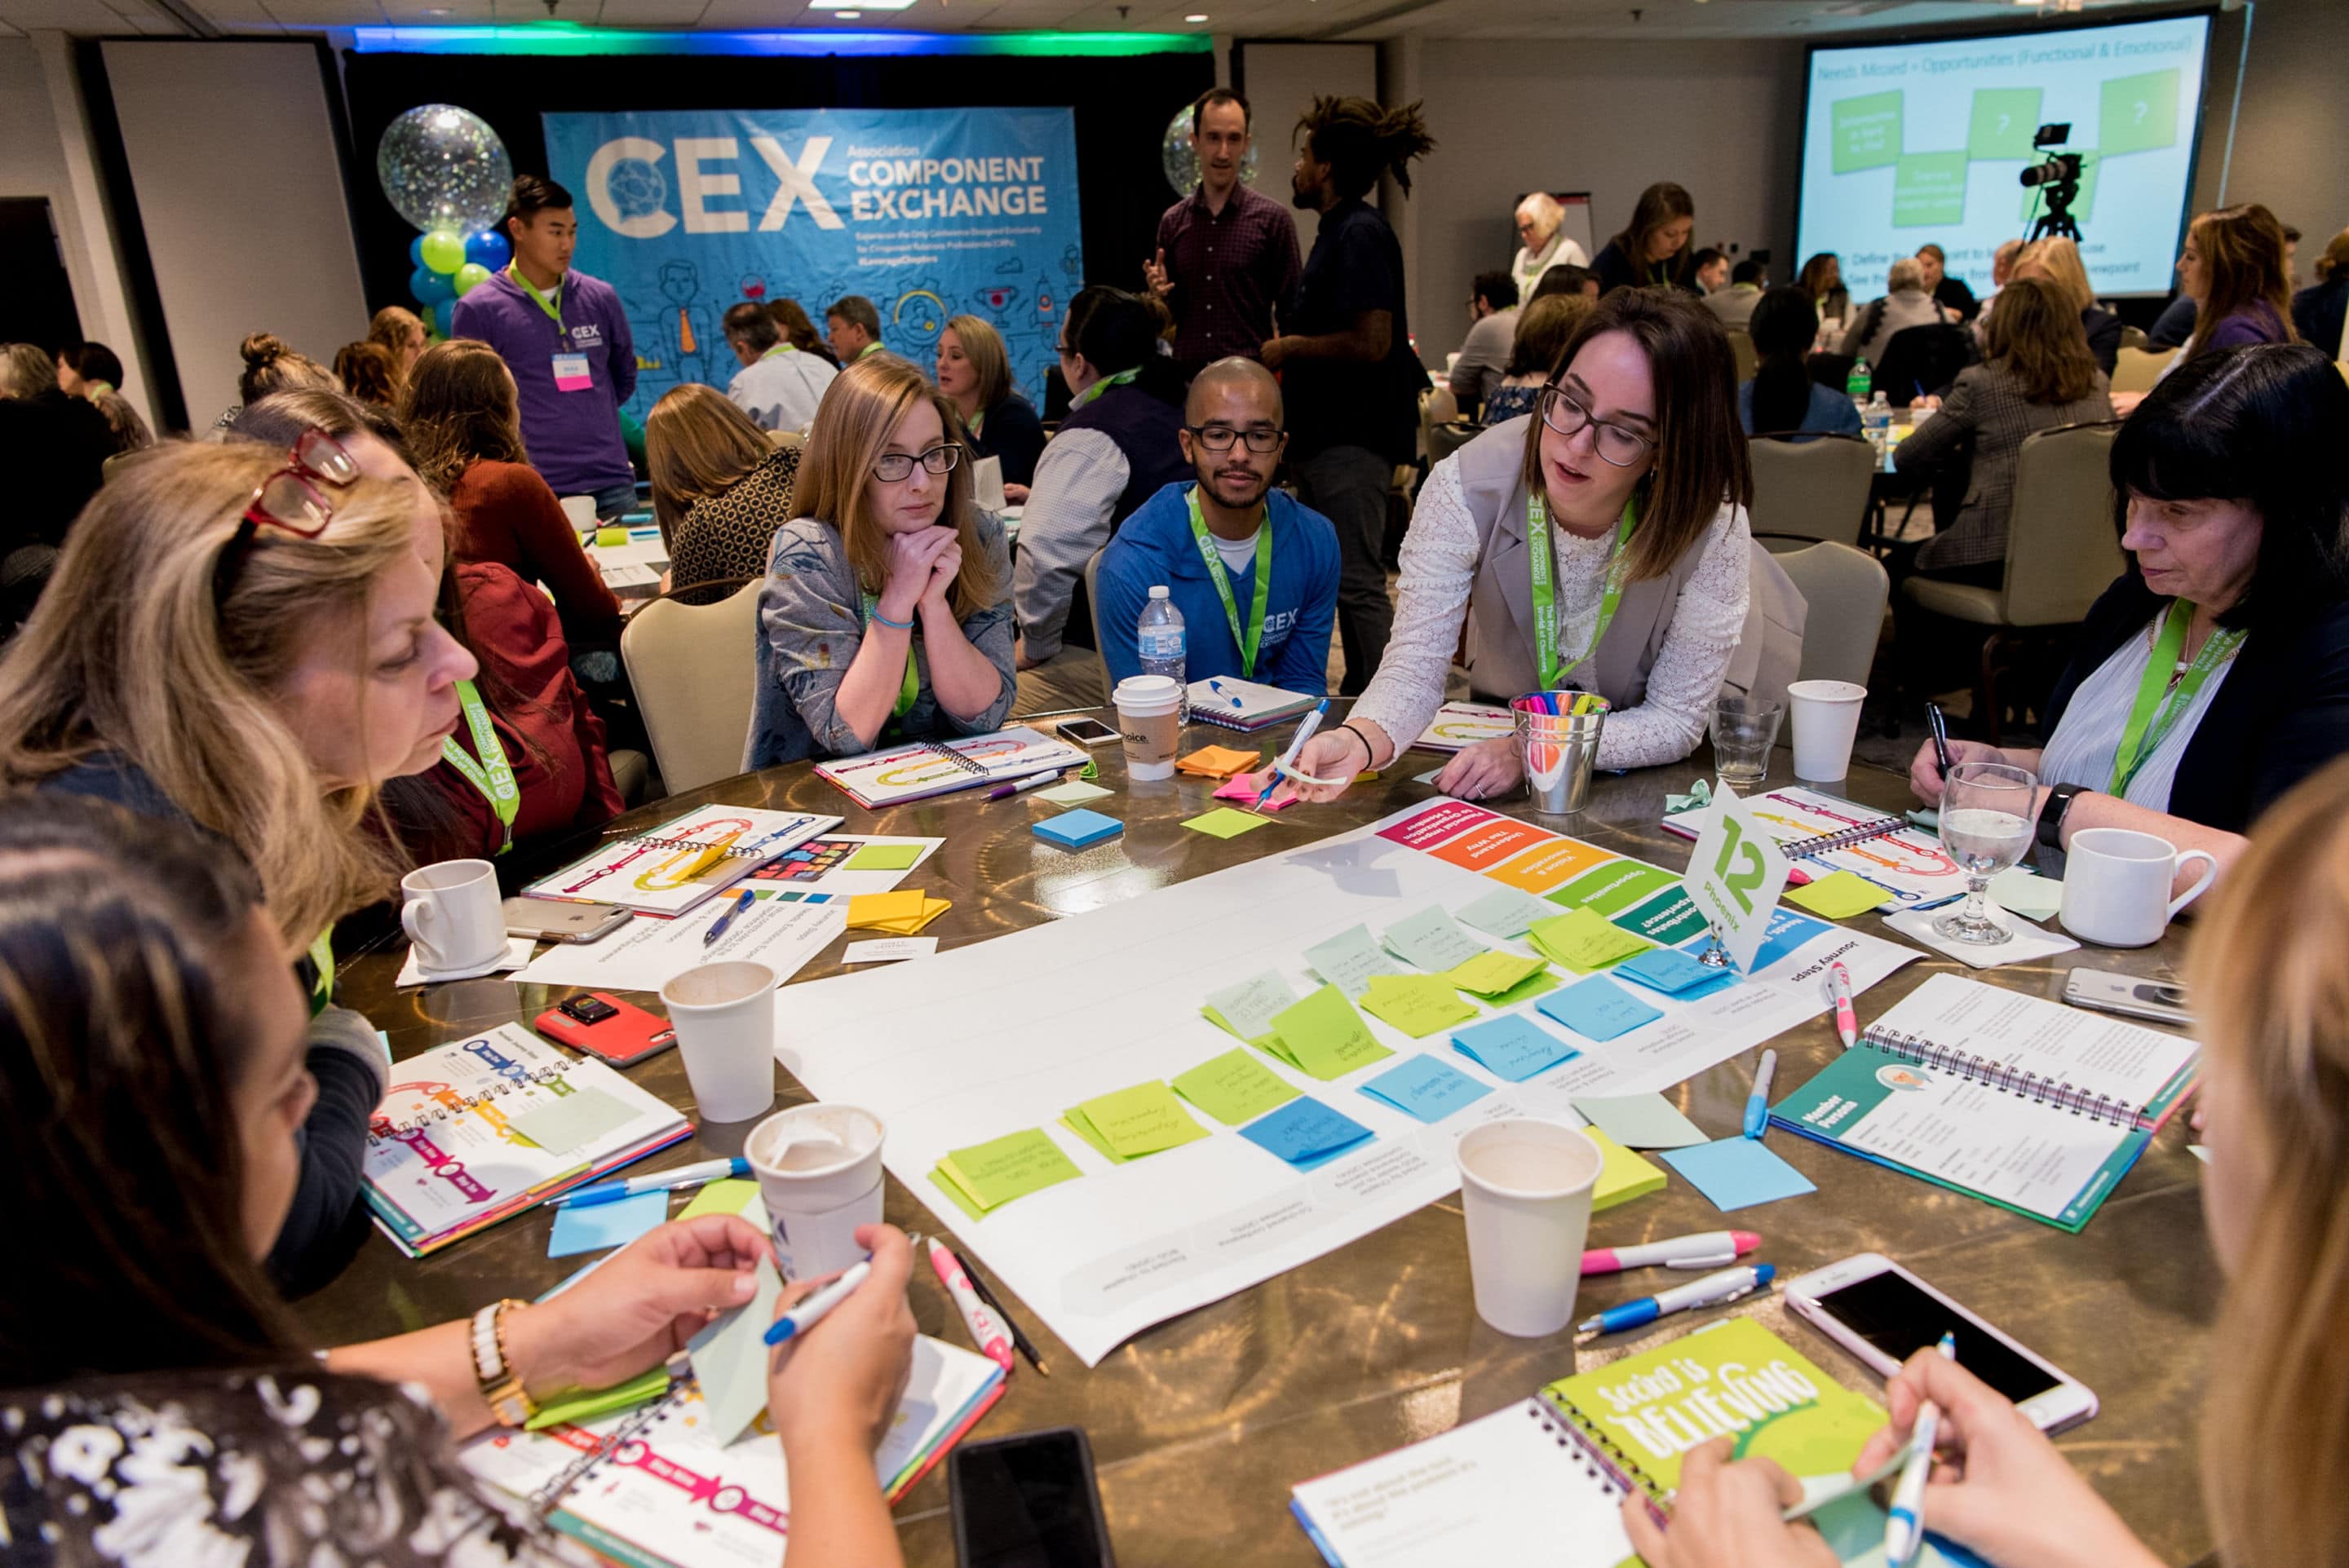 CEX: Member Journey Mapping Part 2